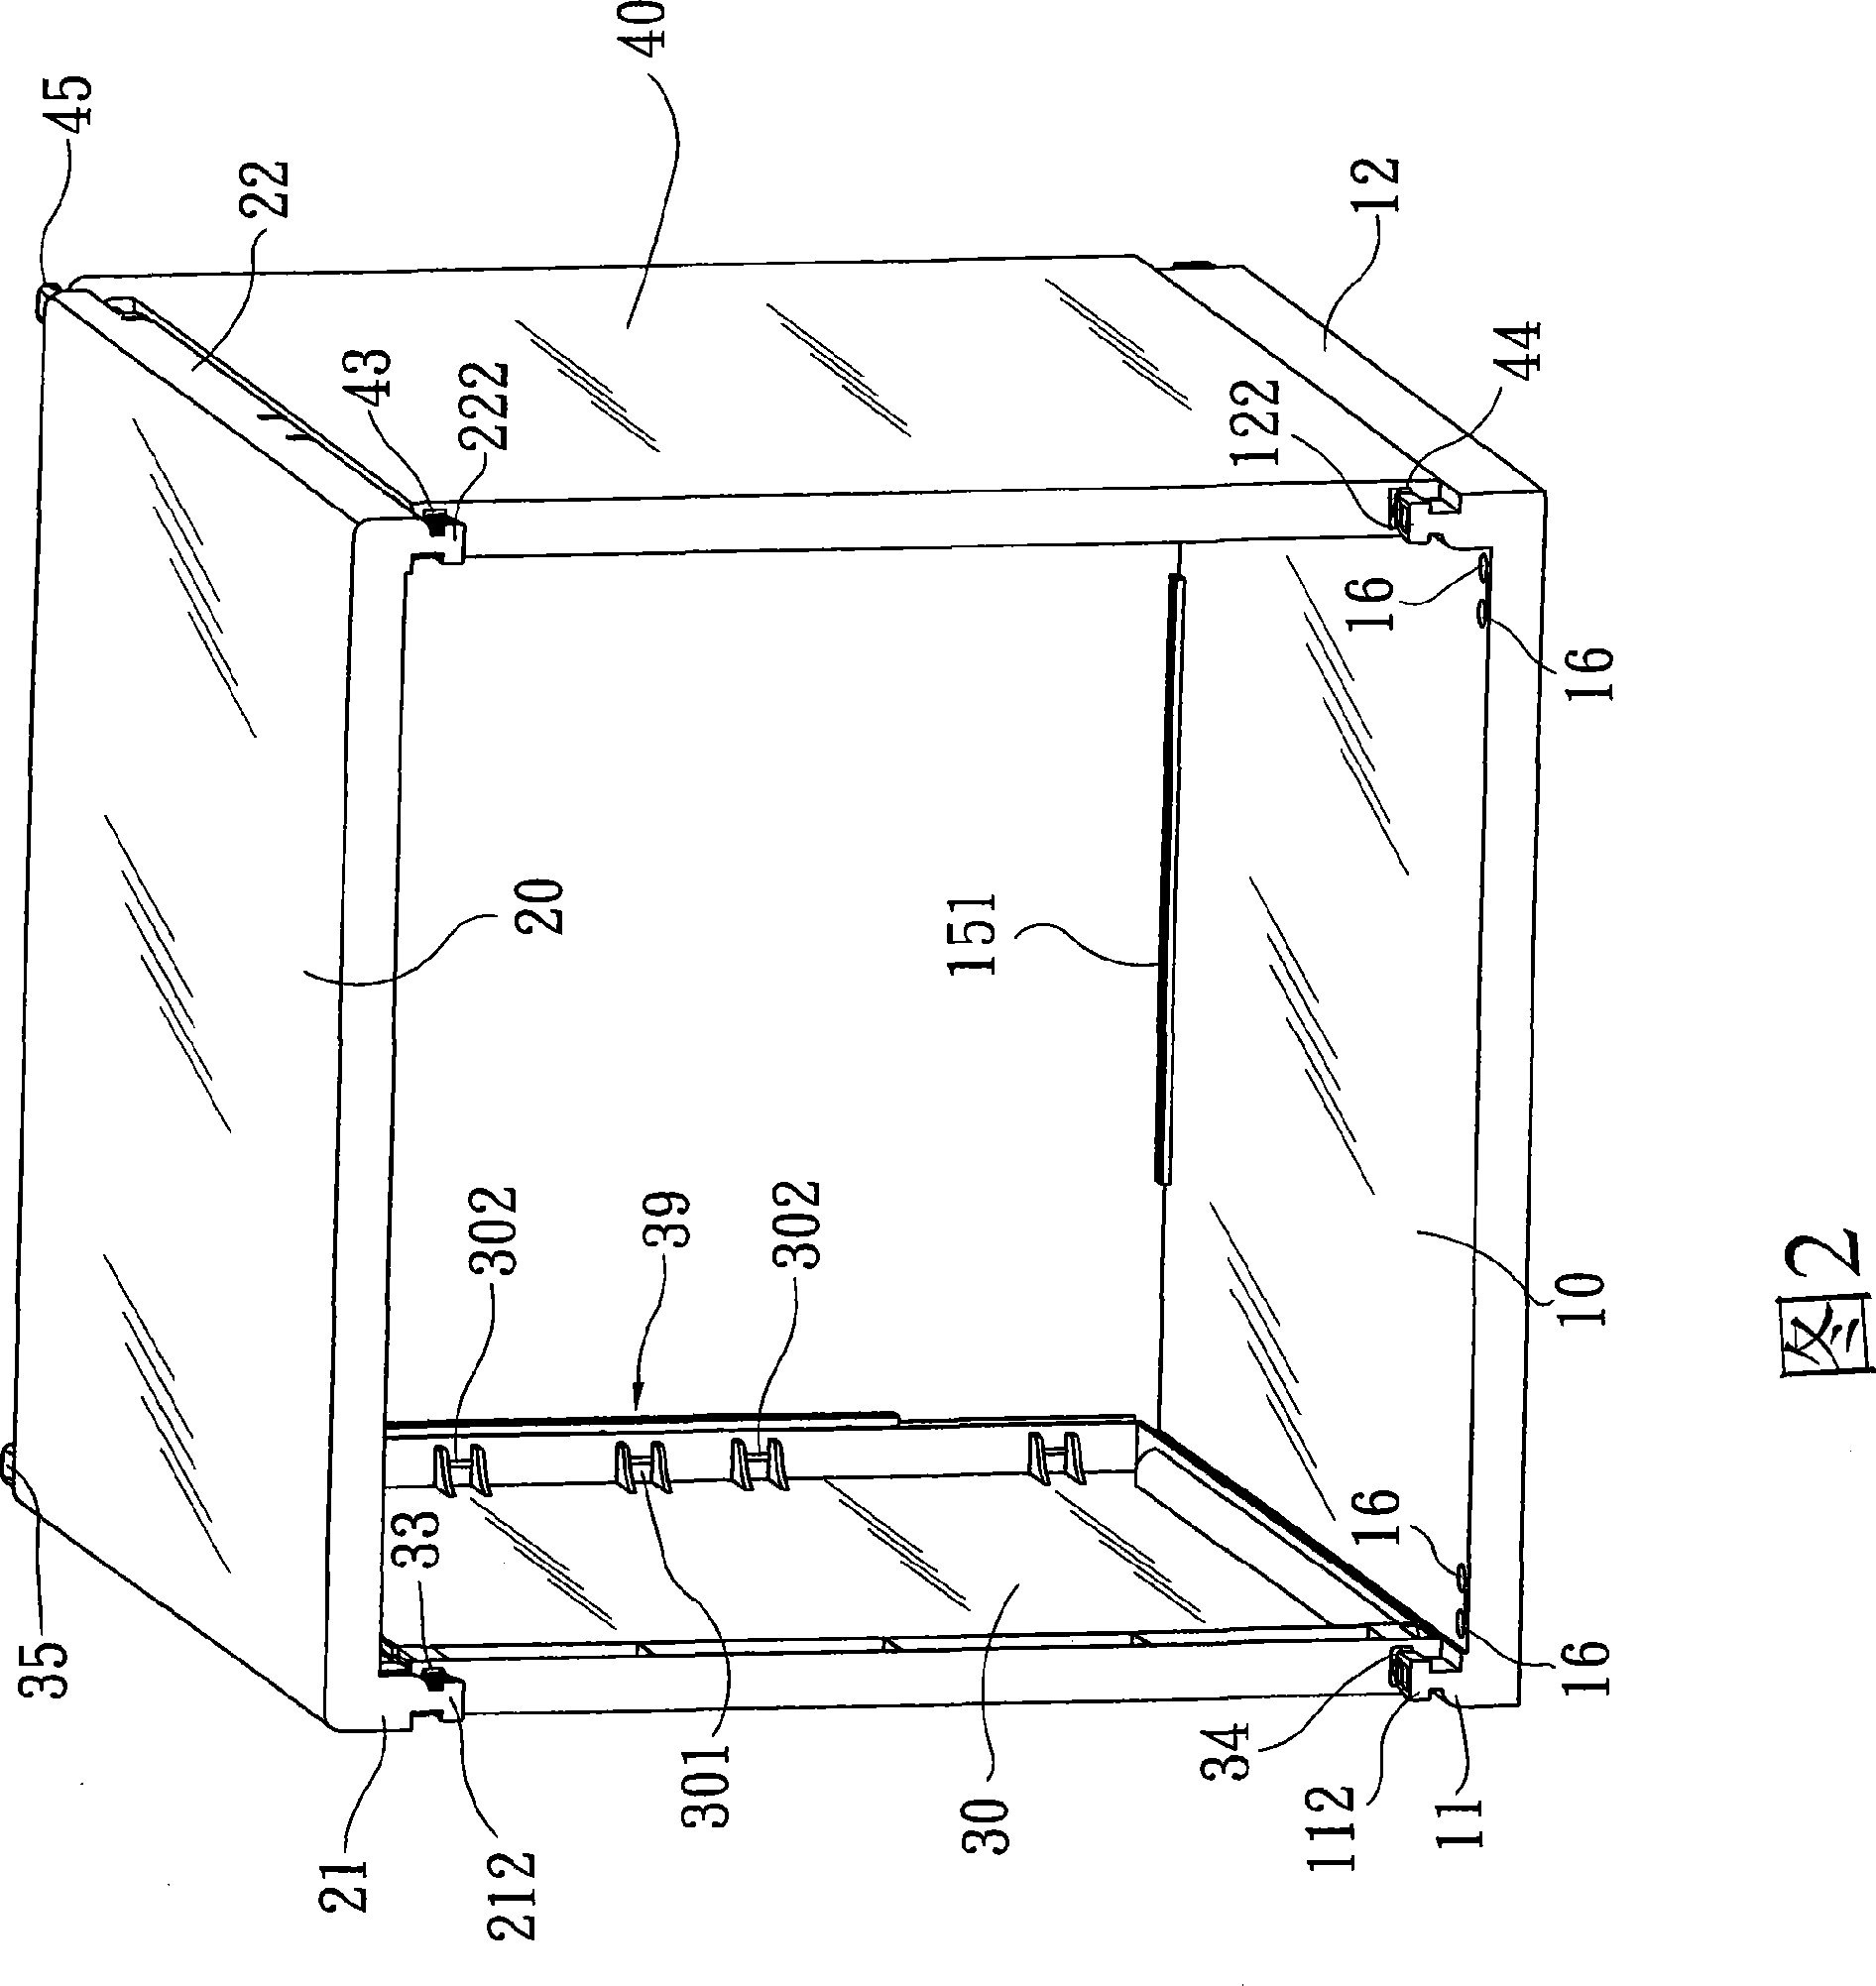 Foldable containing apparatus